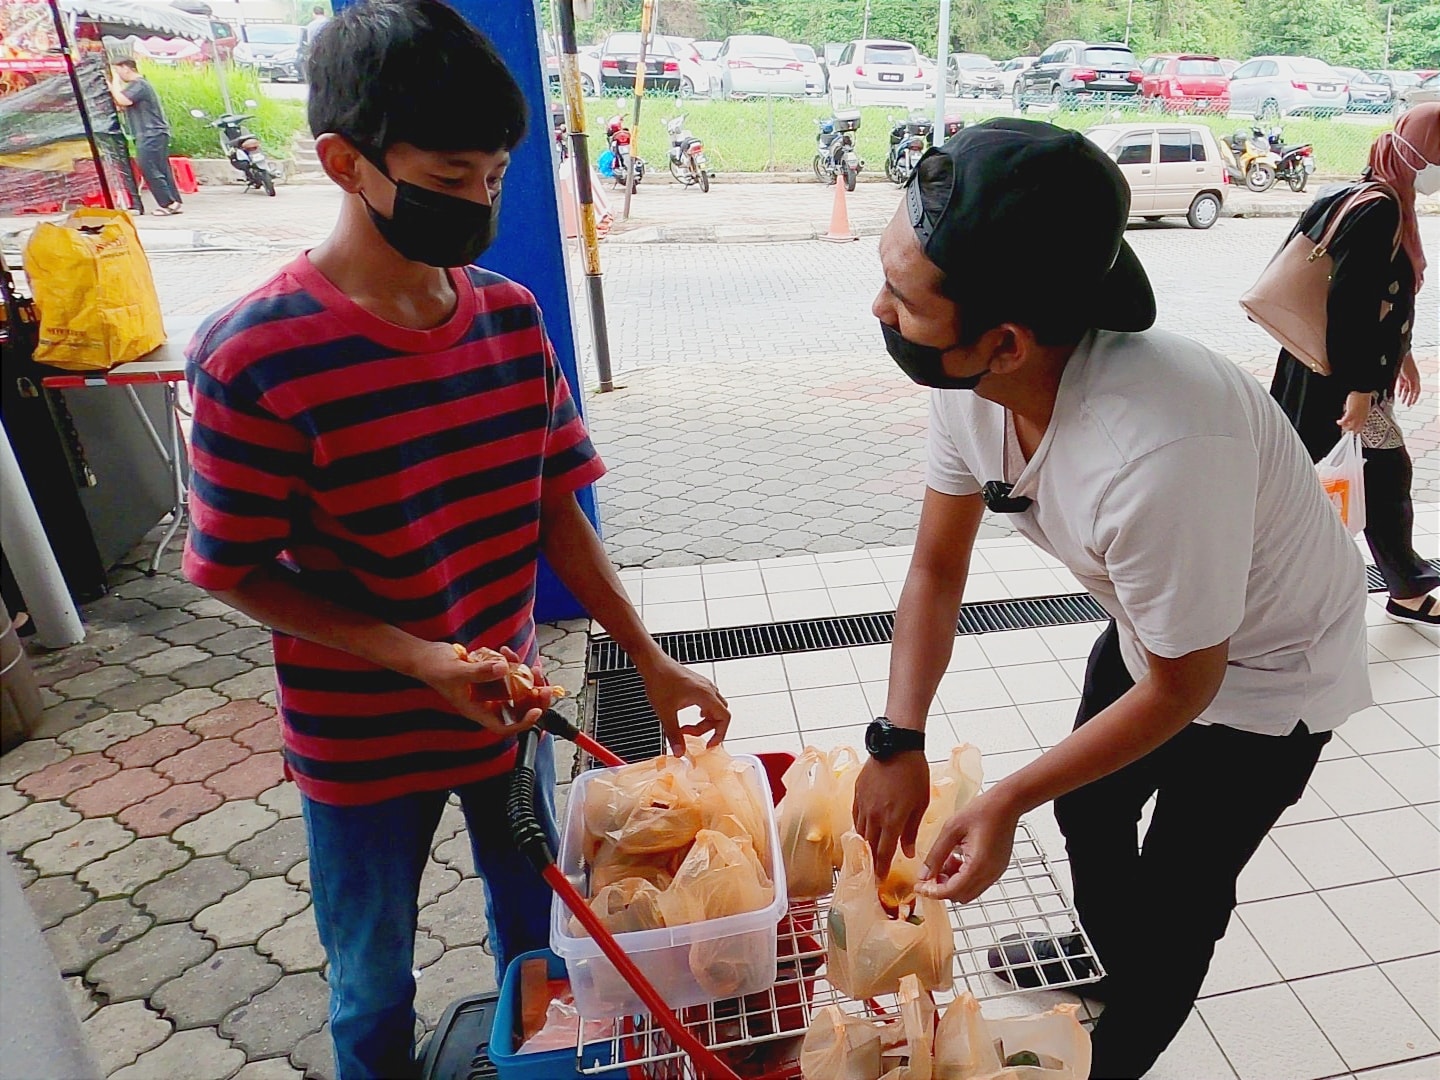 16-year-old Ilham has been selling nasi lemak and pulut panggang to help alleviate his family's financial burden since he was 10-years-old. Image credit: FS Channel